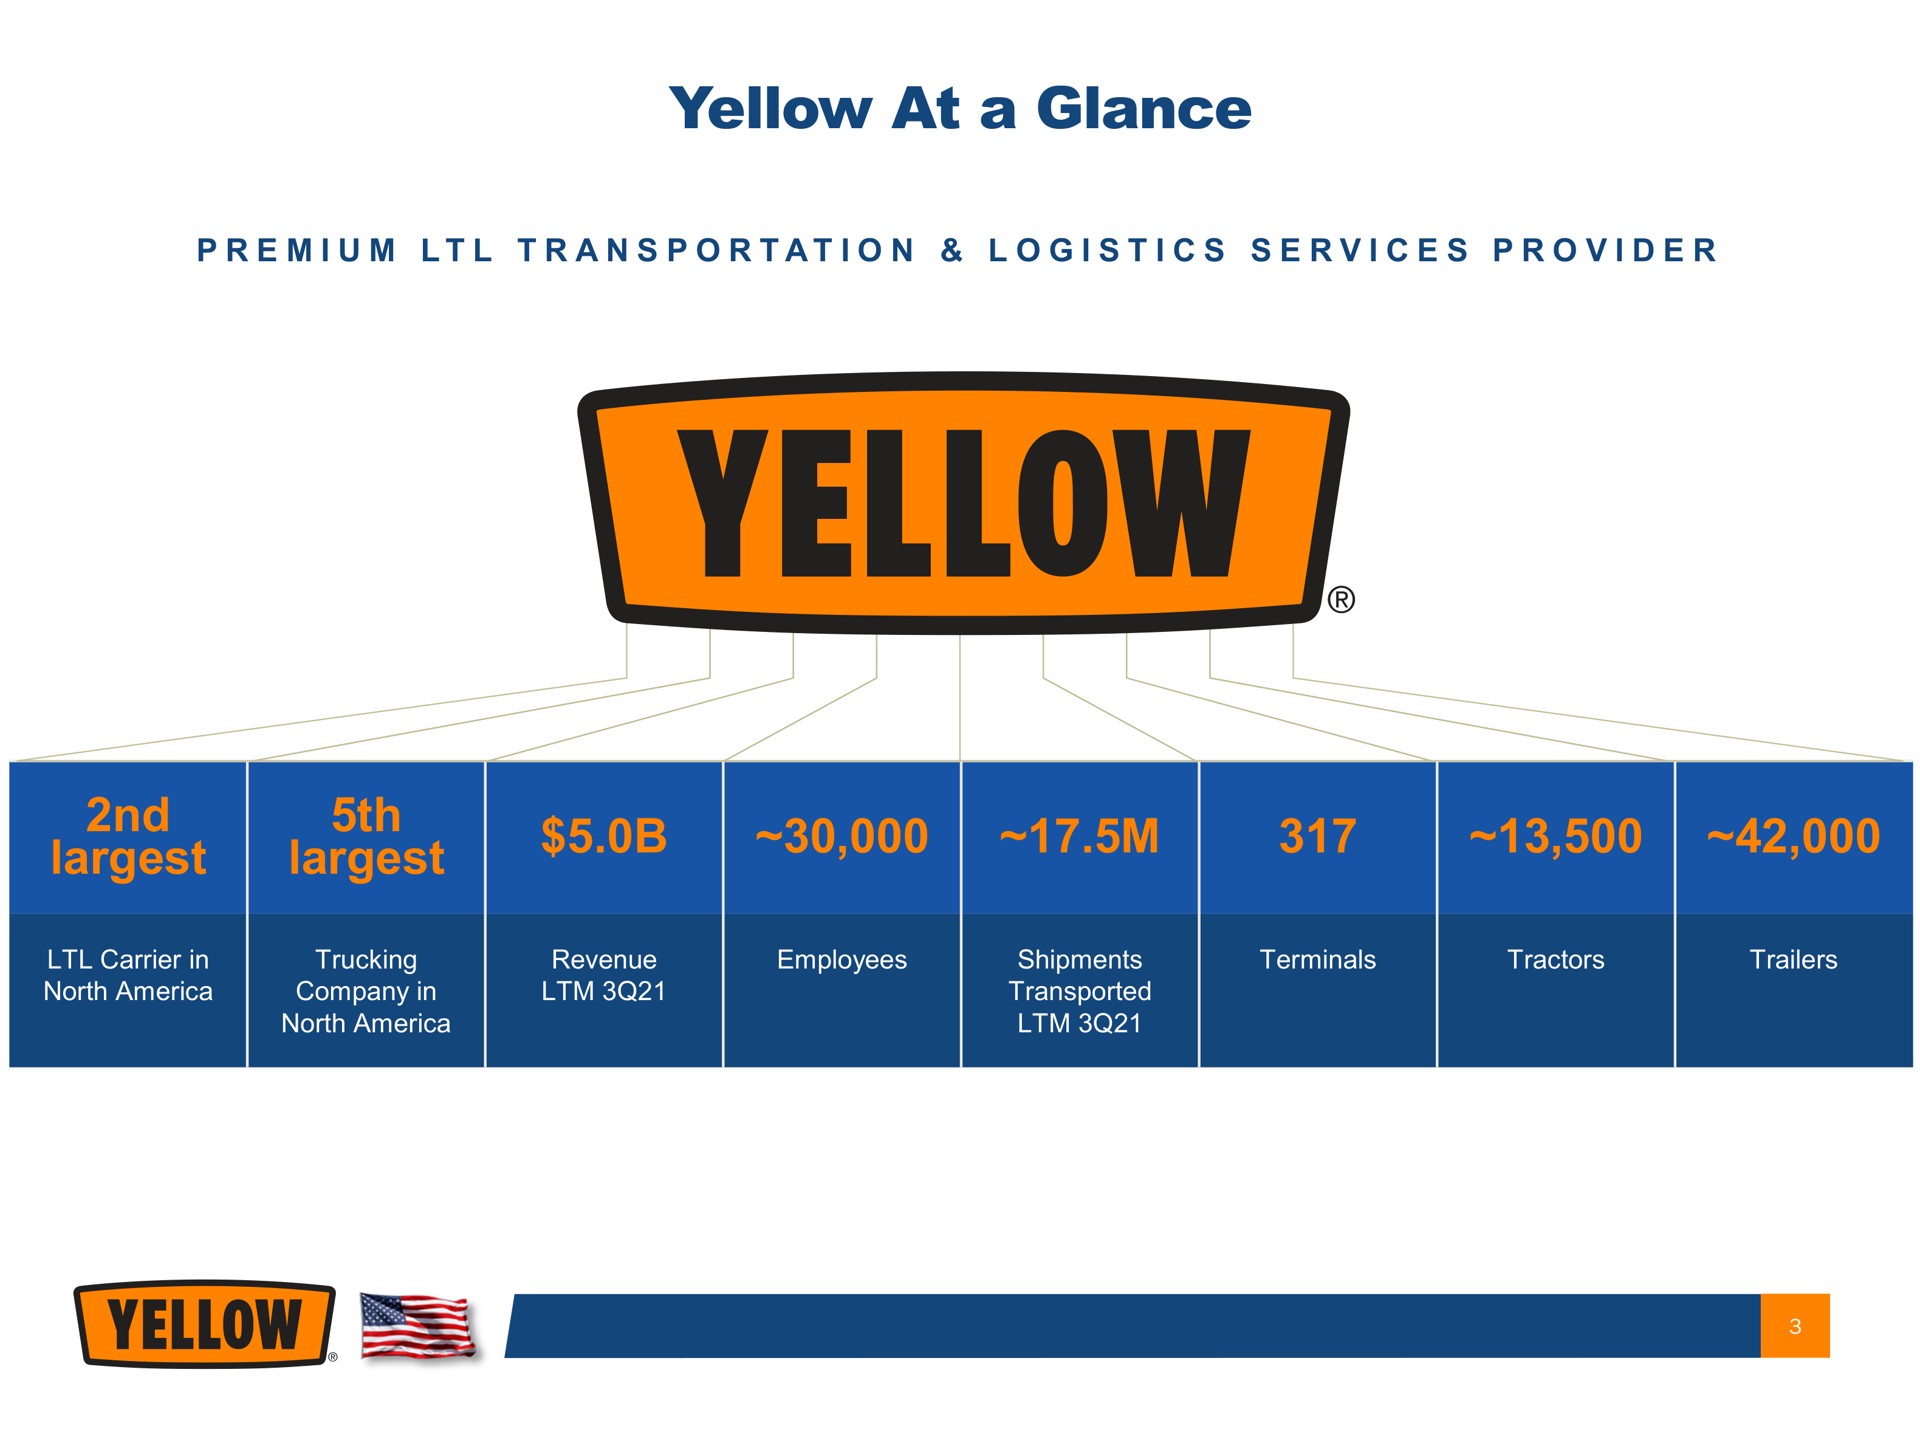 yellow at a glance | Yellow Corporation